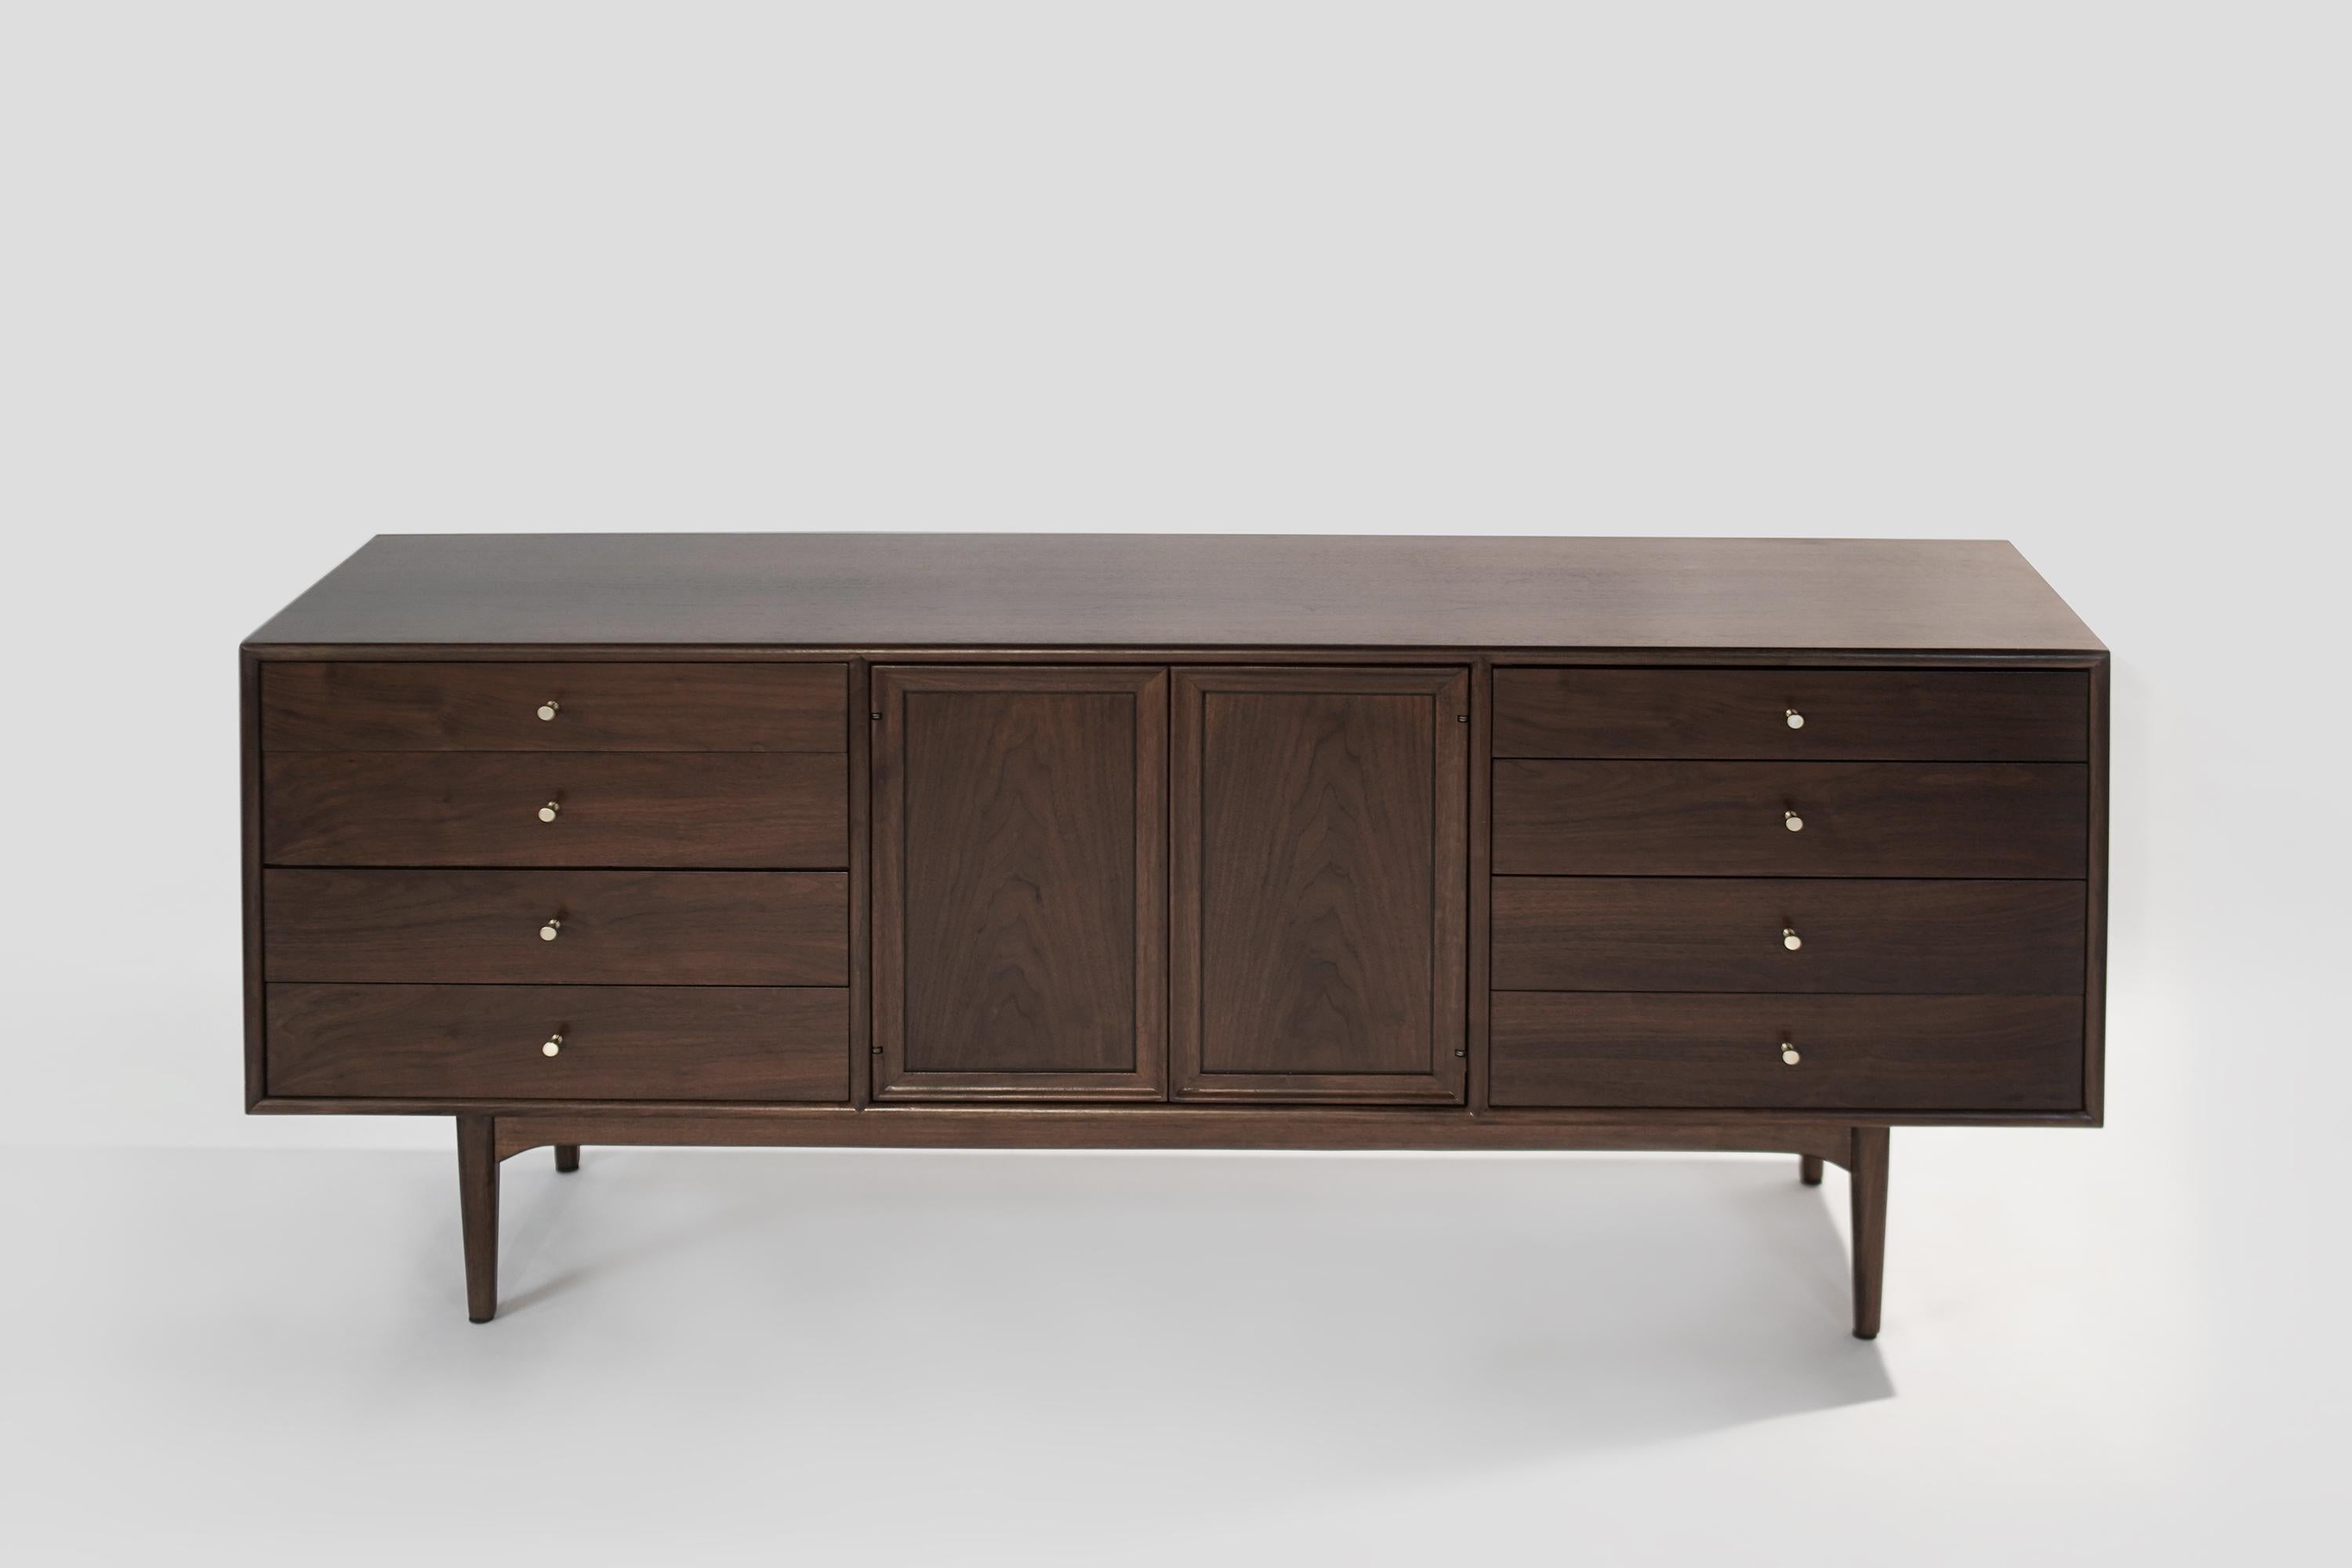 Credenza or dresser designed by Kipp Stewart for Drexel, circa 1950s. Executed in walnut, showcasing its beautiful natural grain. A total of 11 drawers provides ample storage space.